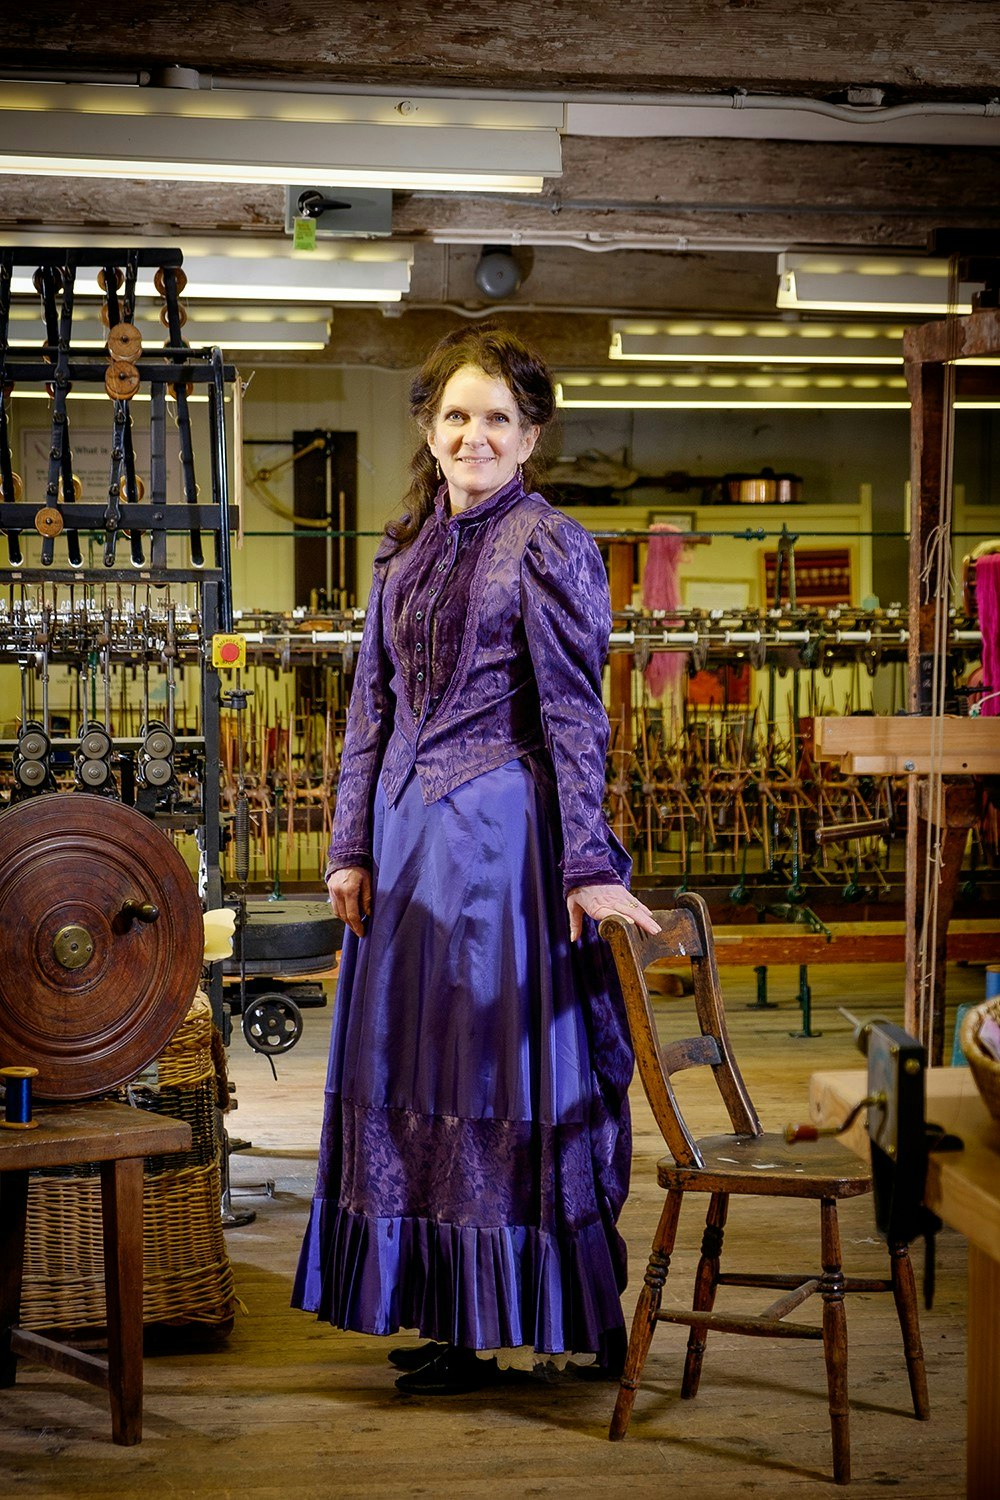 A lady dresses in a purple victorian outfit standing with a hand resting on a chair and with weaving equipment in the background.